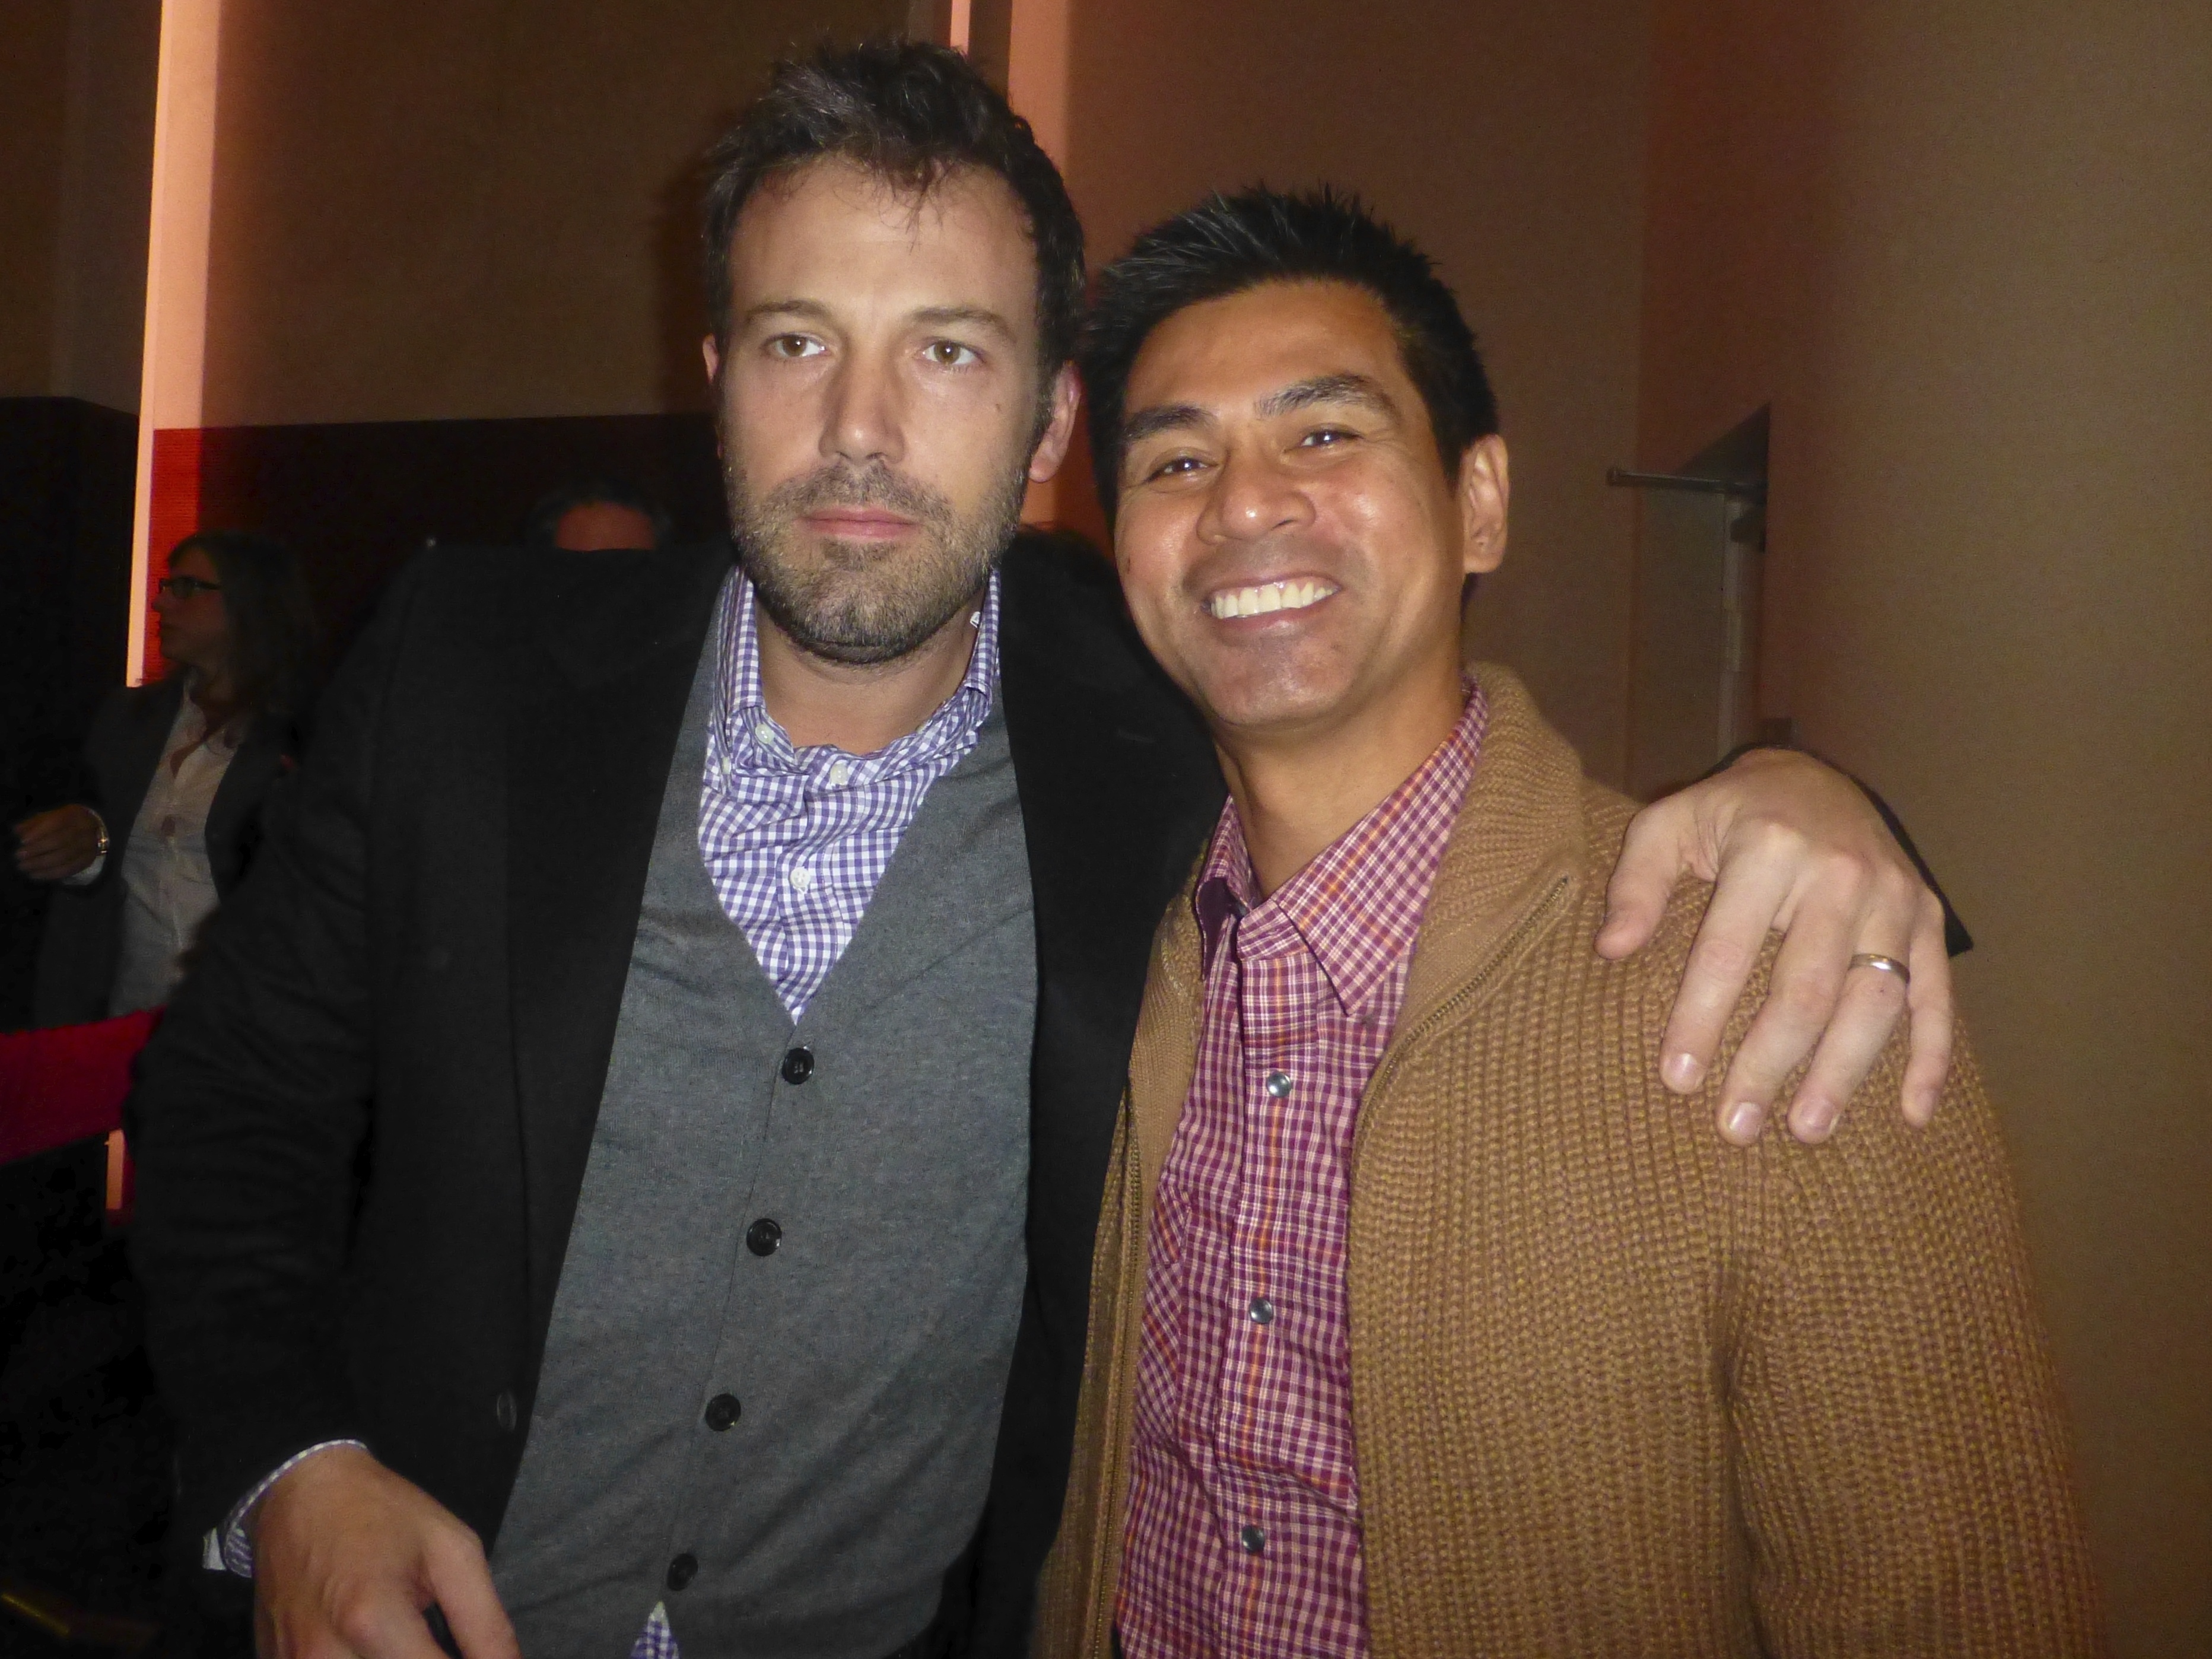 Ben Affleck after screening of his film Argo which won Oscar for Best Picture